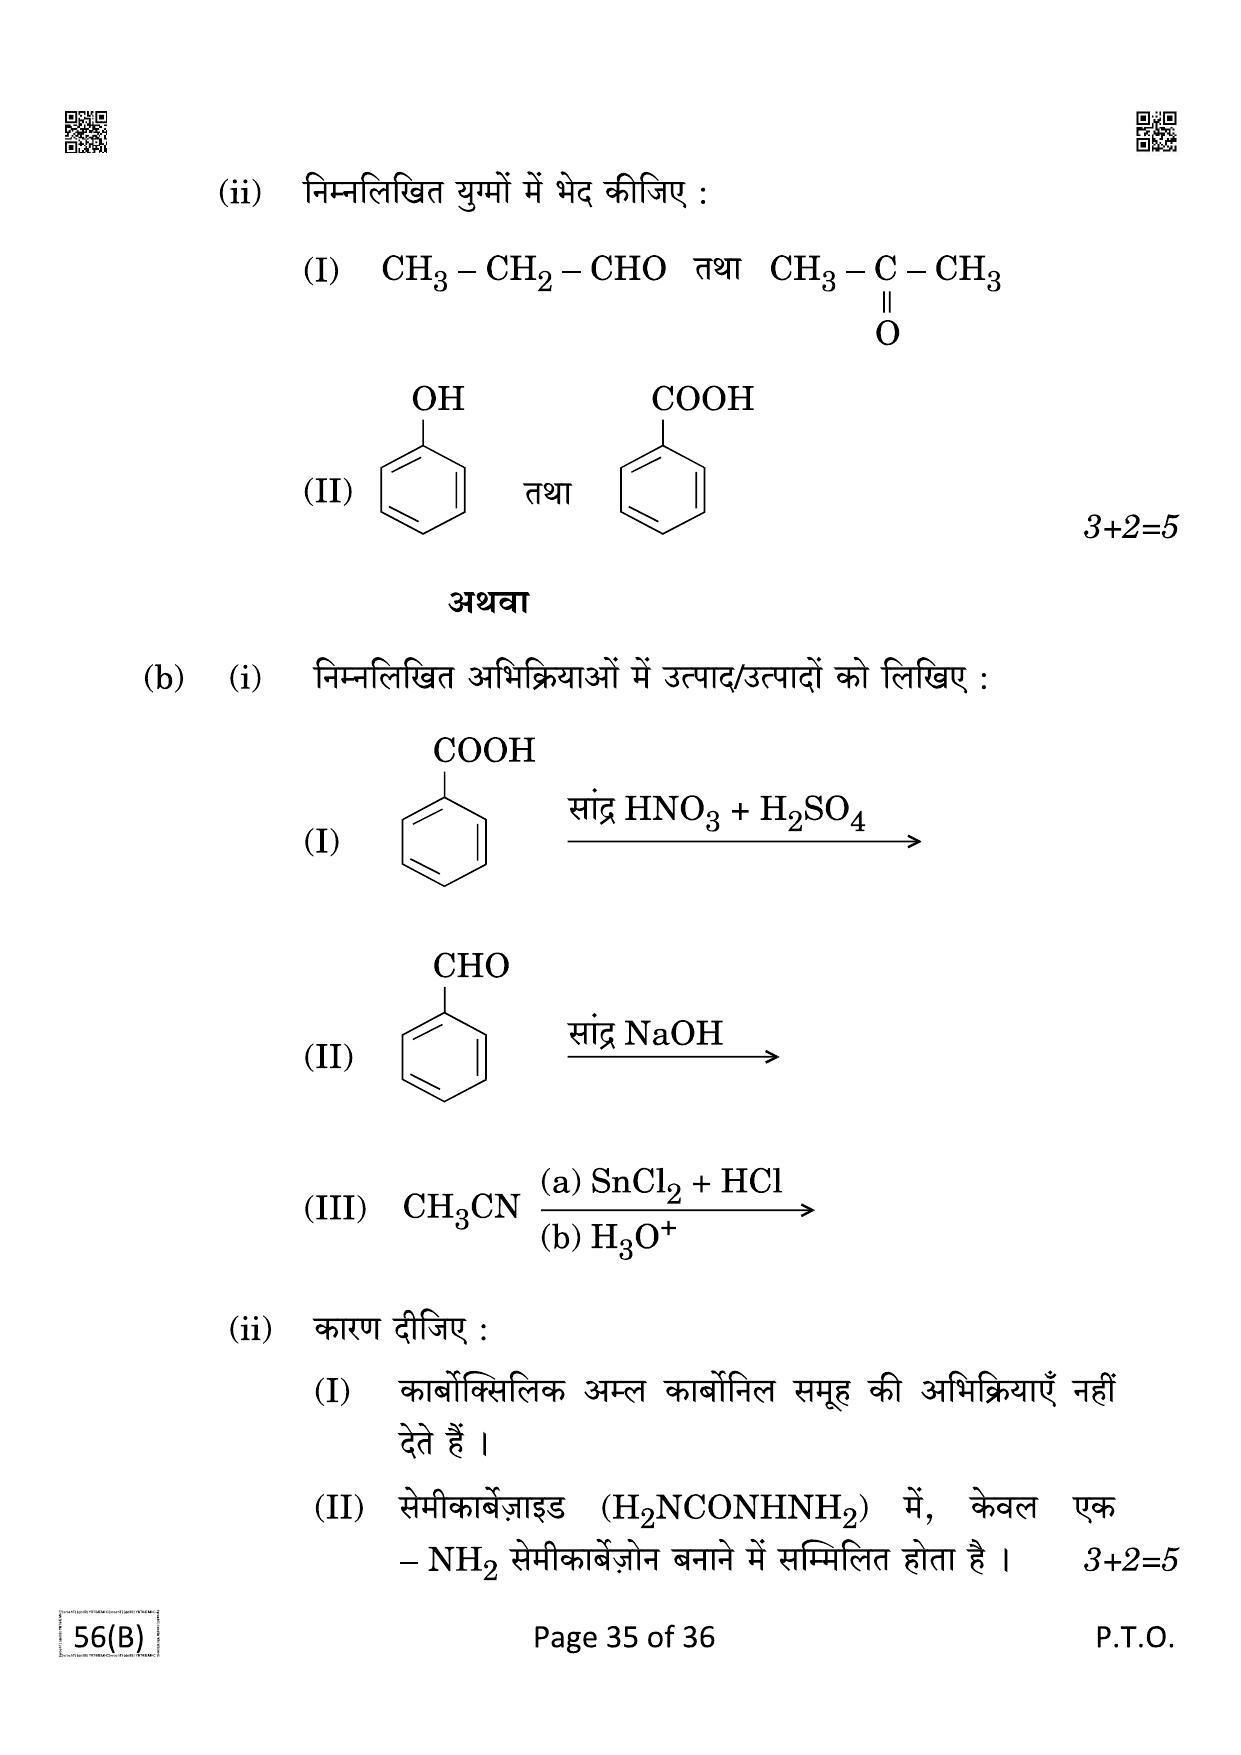 CBSE Class 12 QP_043_CHEMISTRY_FOR_BLIND_CANDIDATES 2021 Compartment Question Paper - Page 35